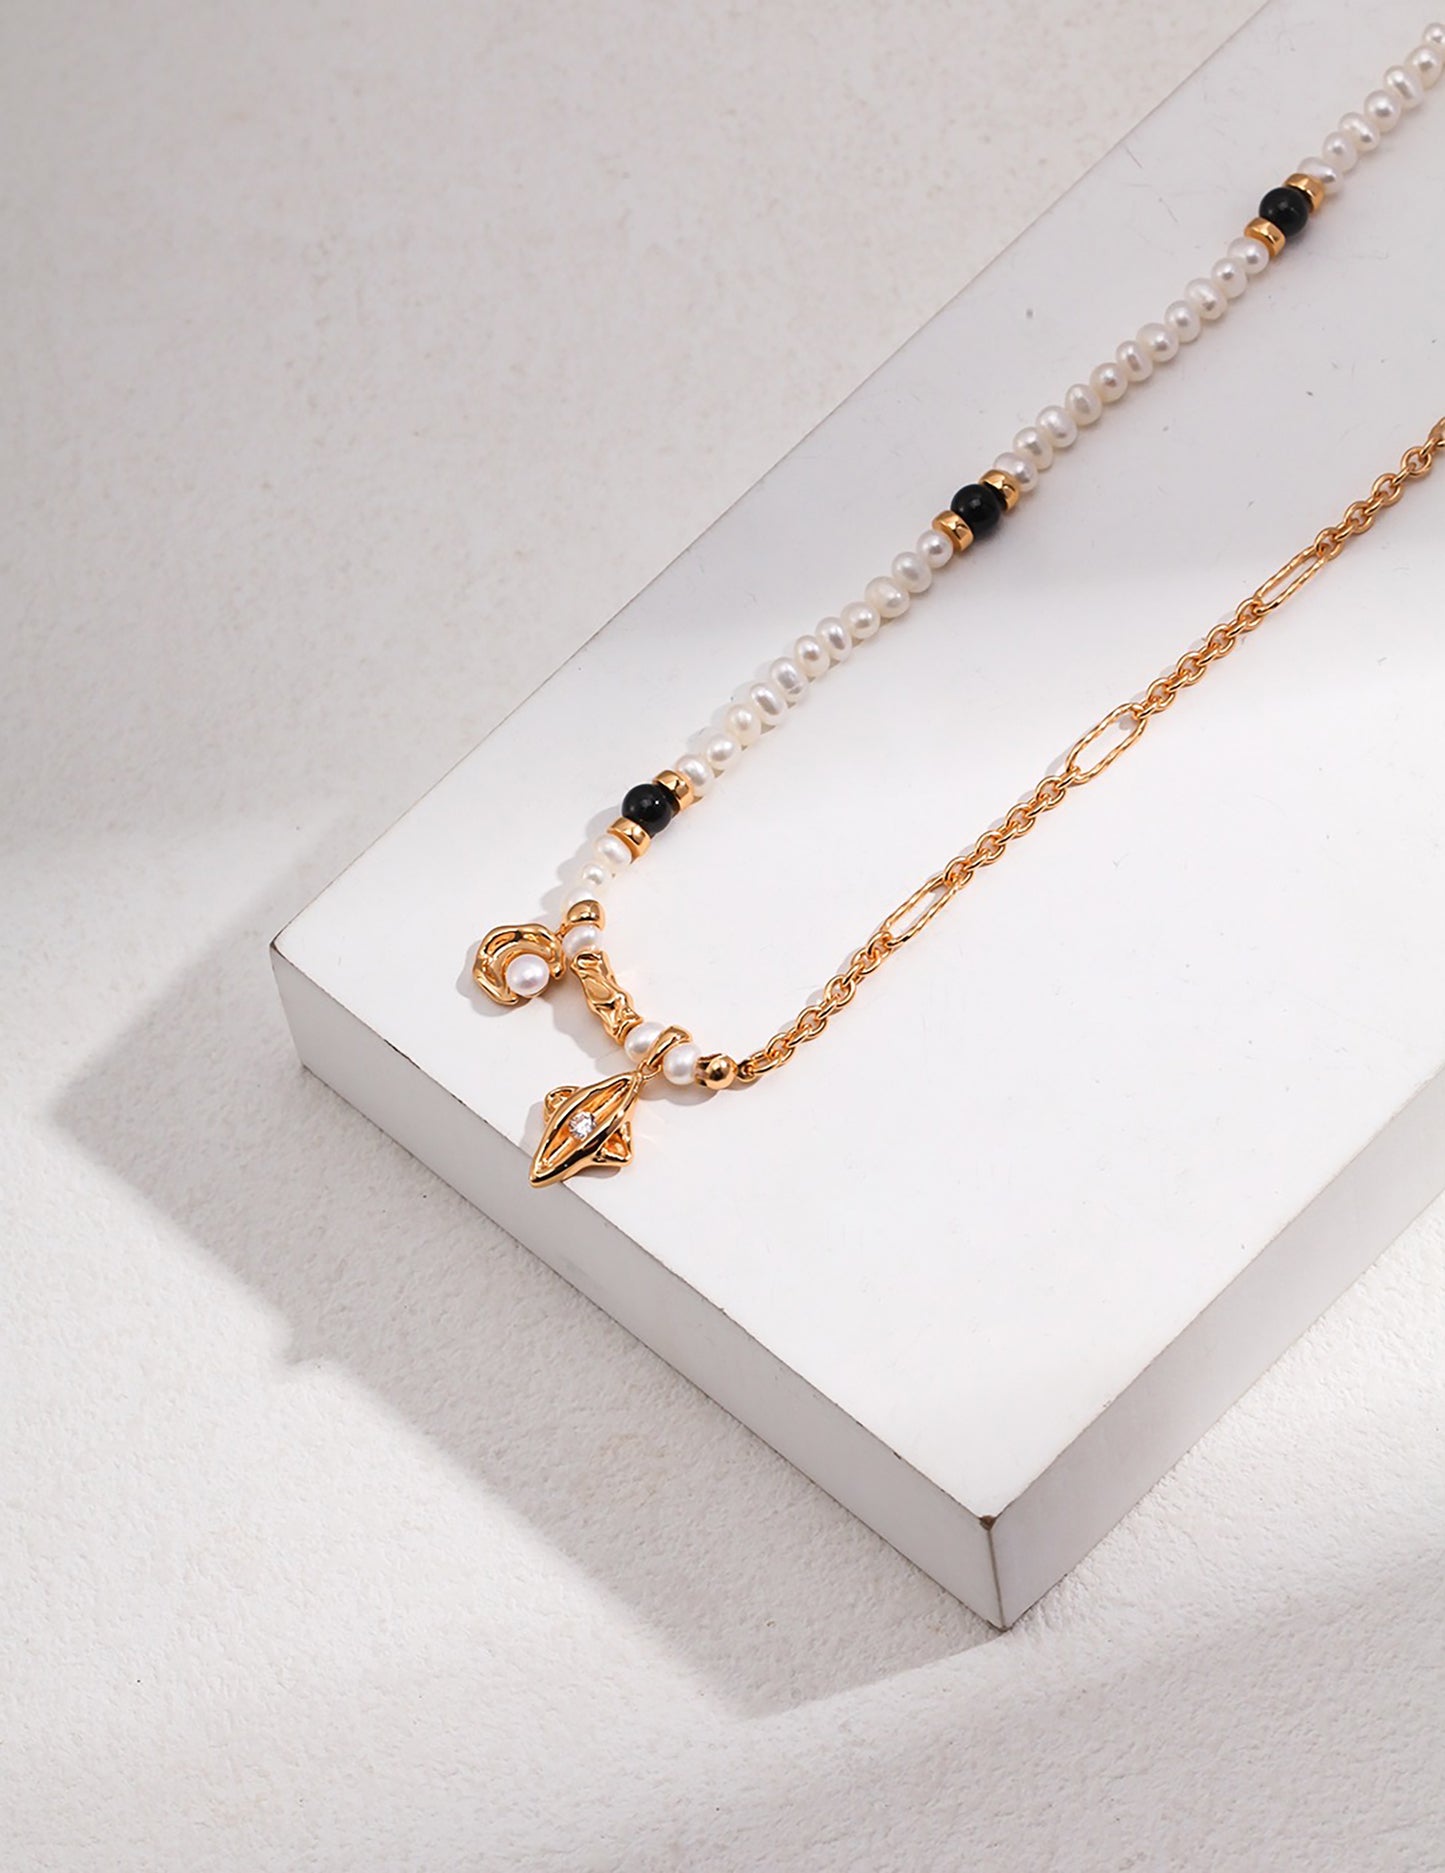 18K Gold Chain and Pearls With Star Pendant Necklace